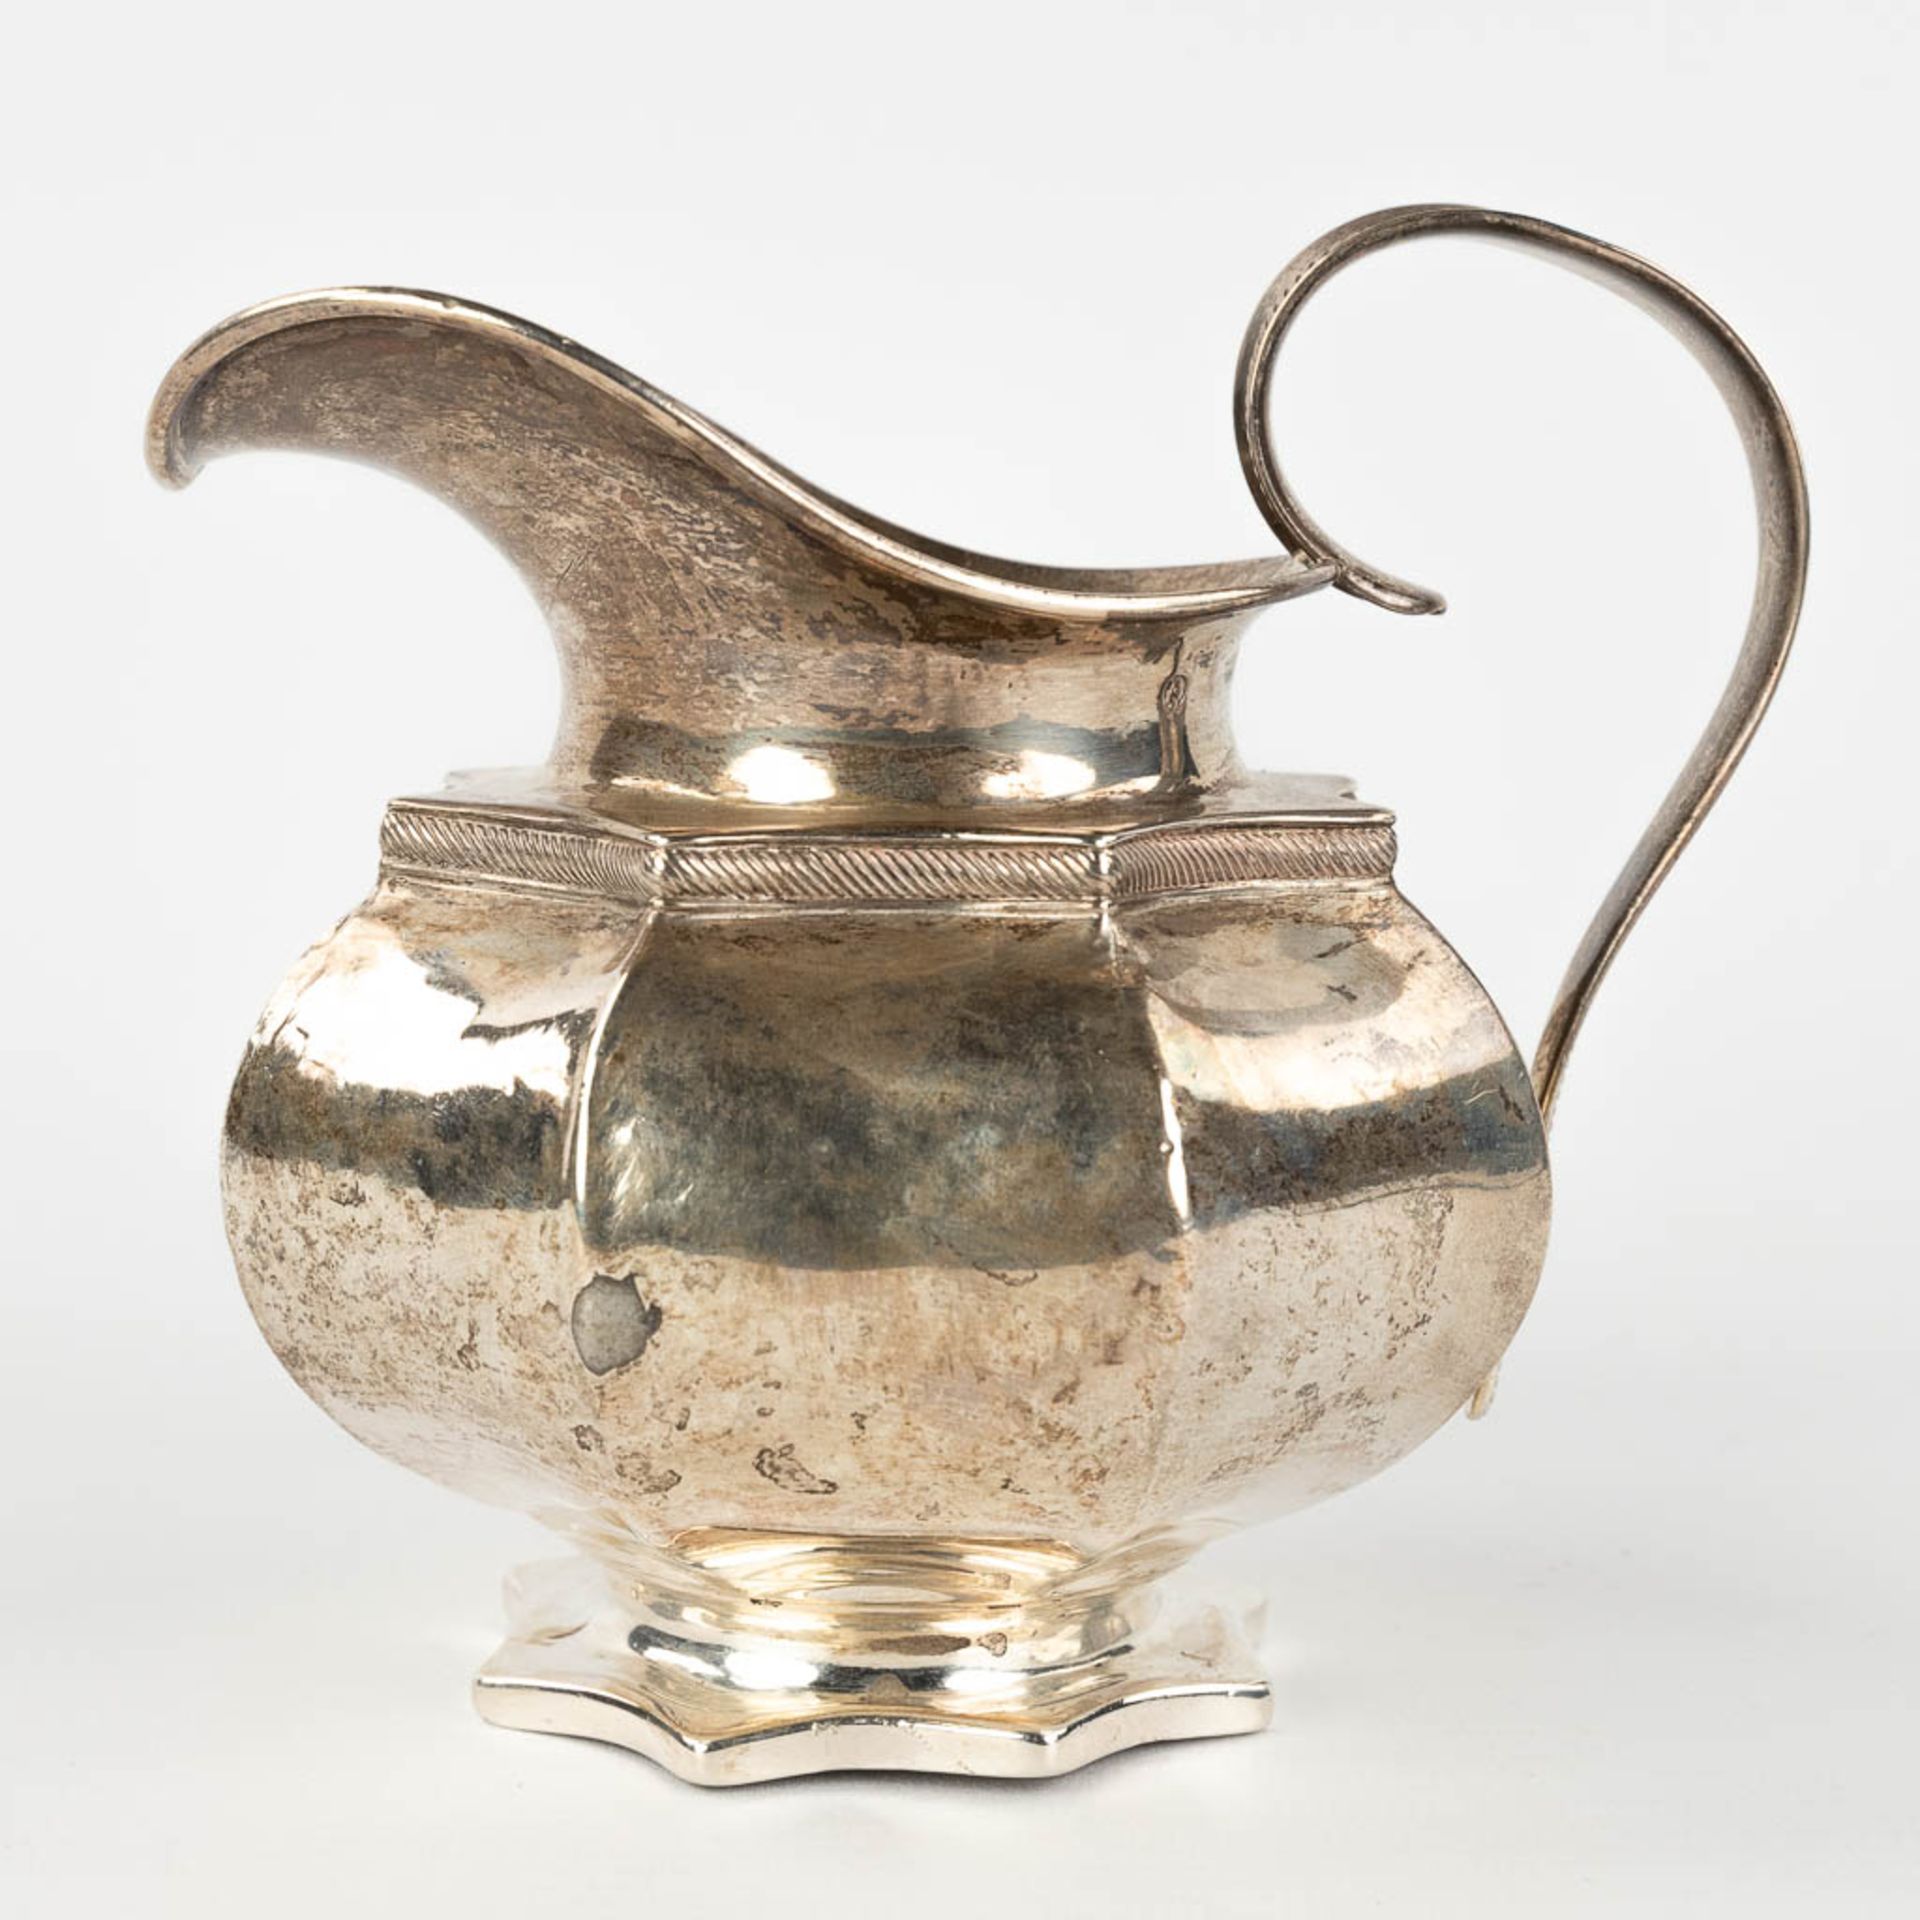 An antique milk jug, silver. The Netherlands, 19th C. 216g. (L: 10 x W: 12,5 x H: 12 cm) - Image 5 of 10